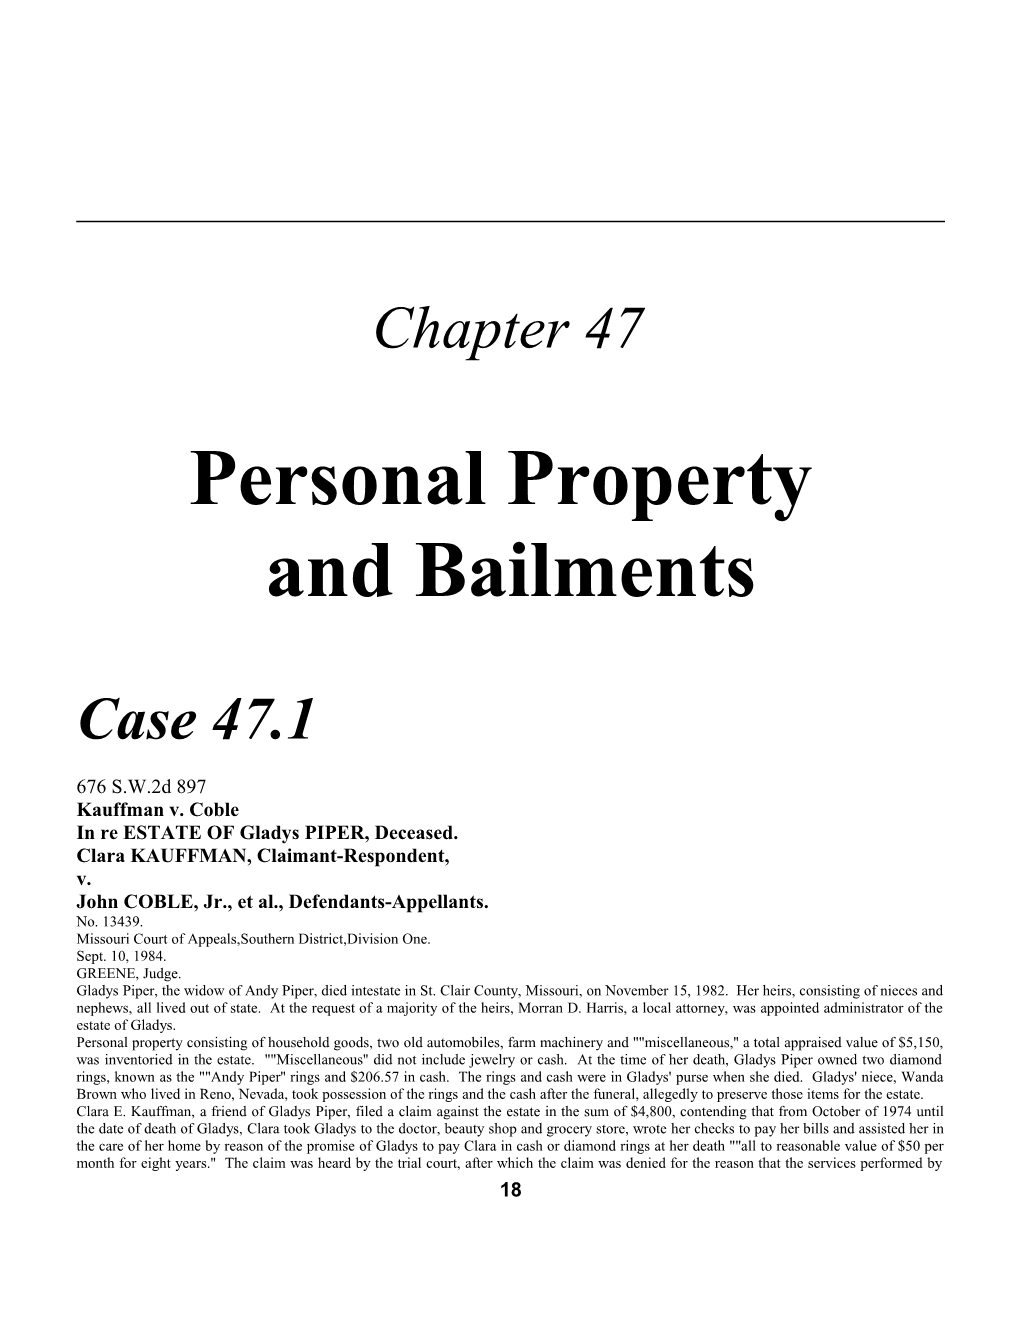 Chapter 47: Personal Property and Bailments 793